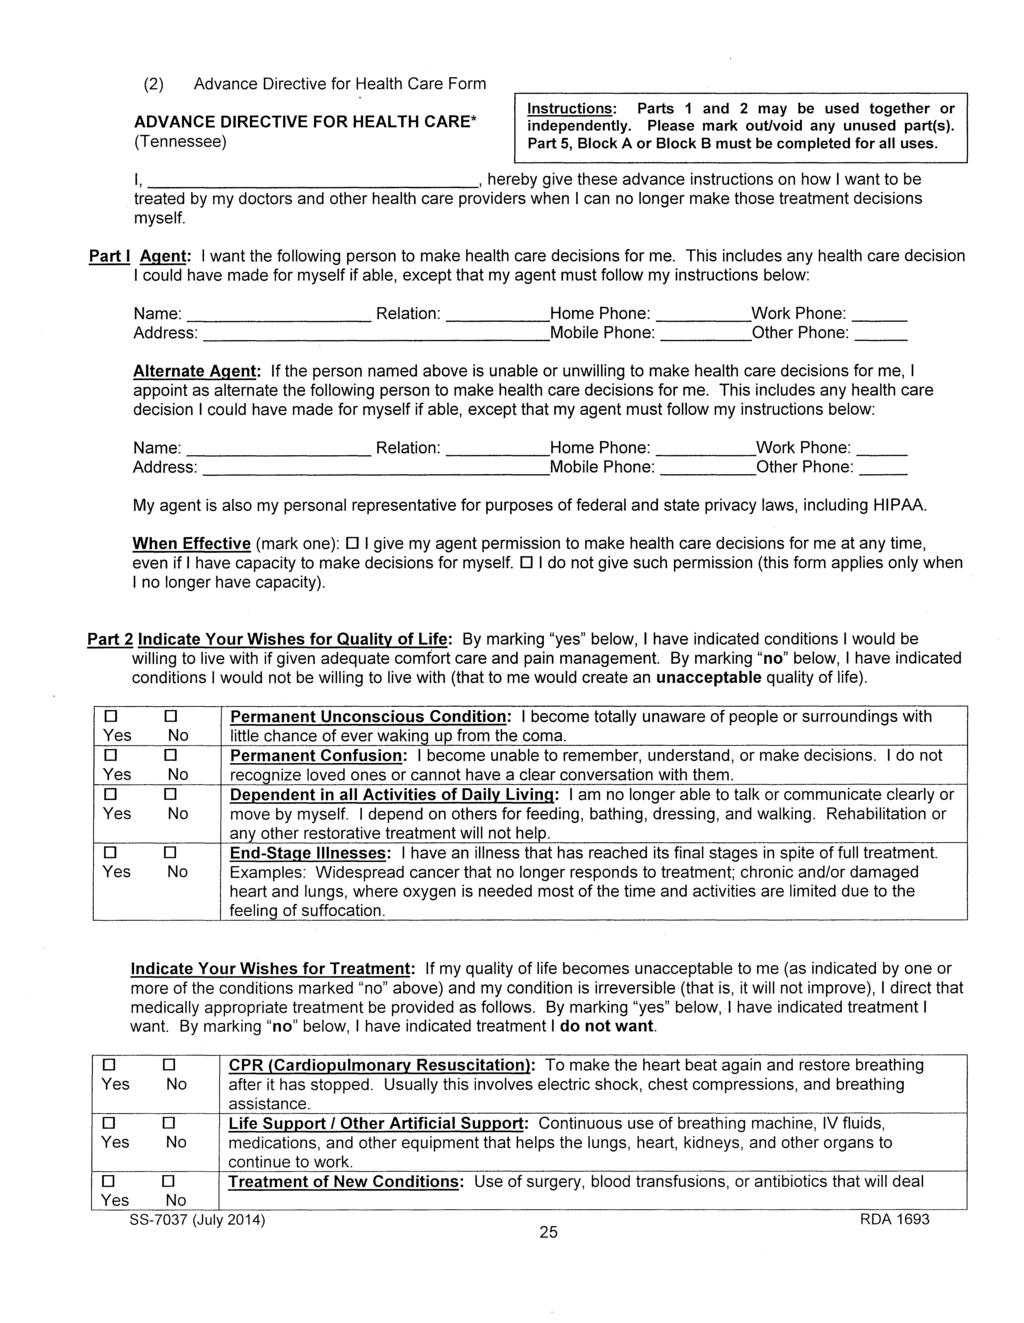 (2) Advance irective for Health Care Form AVANCE IRECTIVE FOR HEALTH CARE* (Tennessee) Instructions: Parts 1 and 2 may be used together or independently. Please mark out/void any unused part(s).